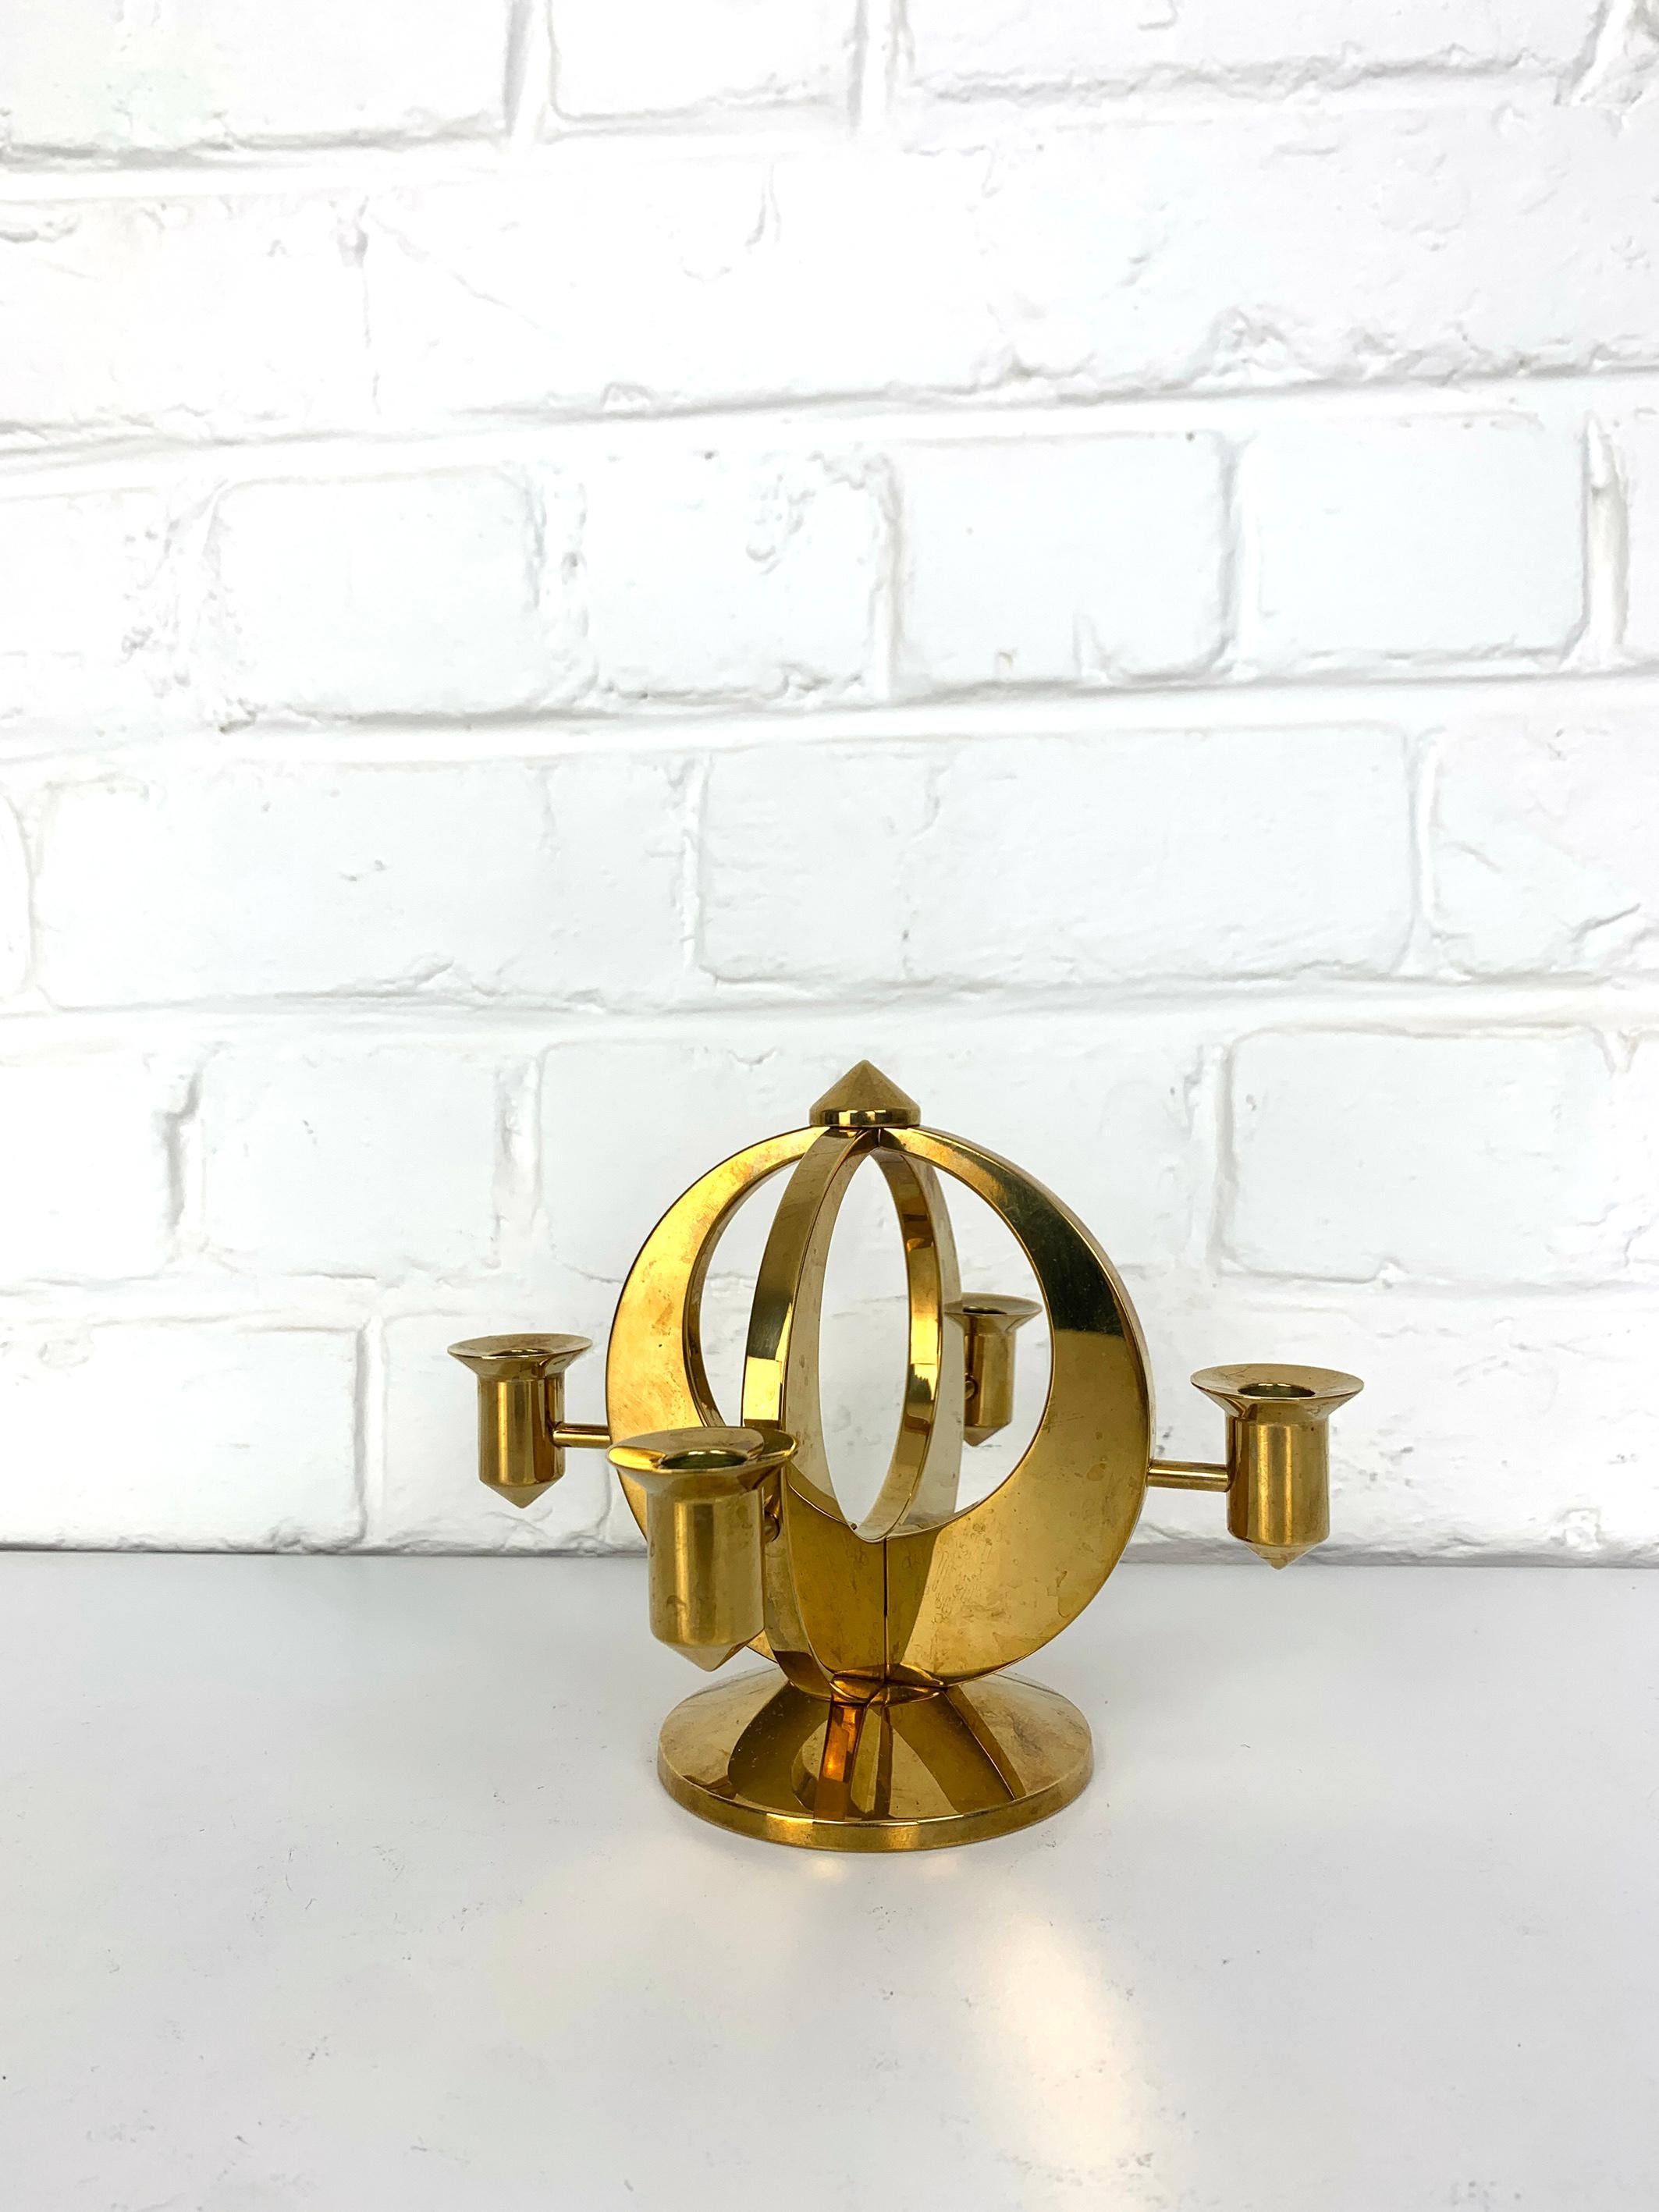 A Mid-Century Candelabra for 4 candles in solid brass (weight 3 lbs / 1.37 kg). 

Created and made by Arthur Petterson, he signed his candleholders “Arthur Pe Kolbäck”.

He was born in 1919 in Kolbäck, Sweden, where he lived and worked all his live.